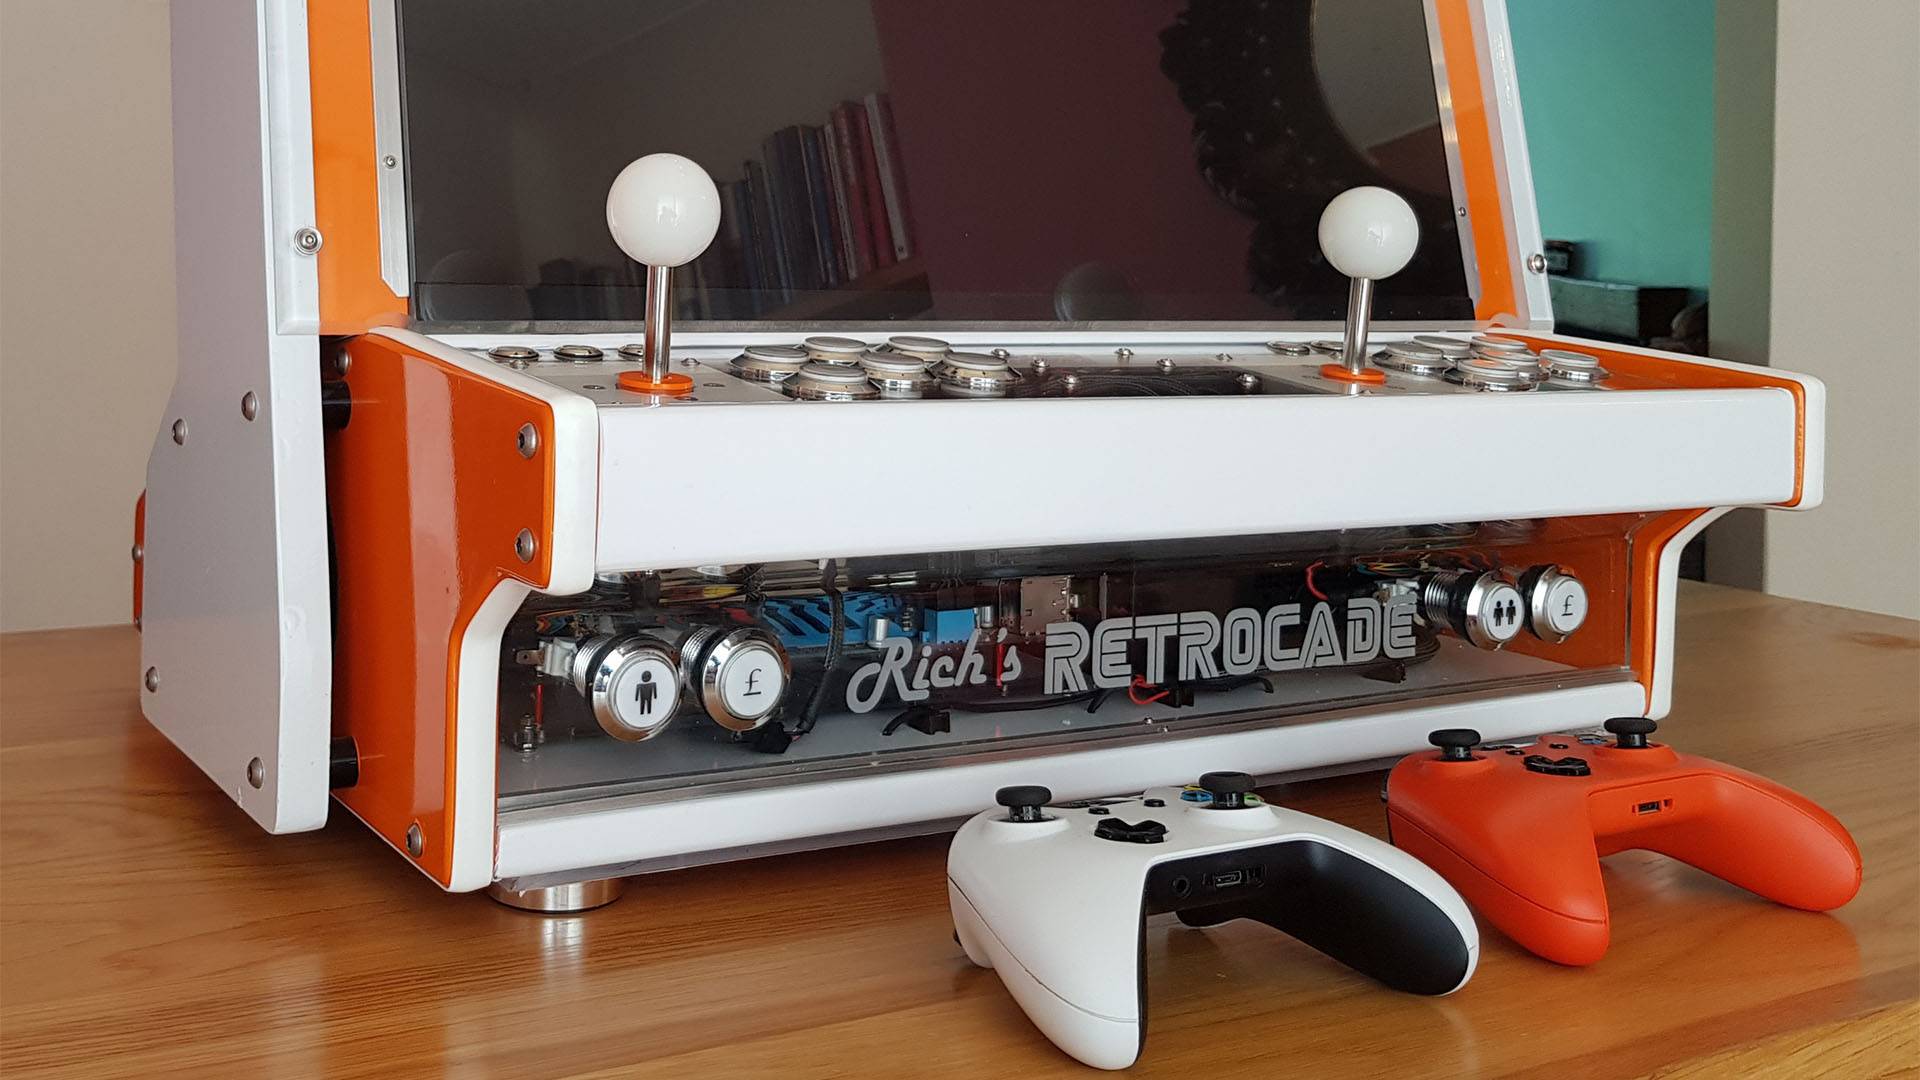 Retro arcade gaming custom PC build: Retrocade buttons and controllers